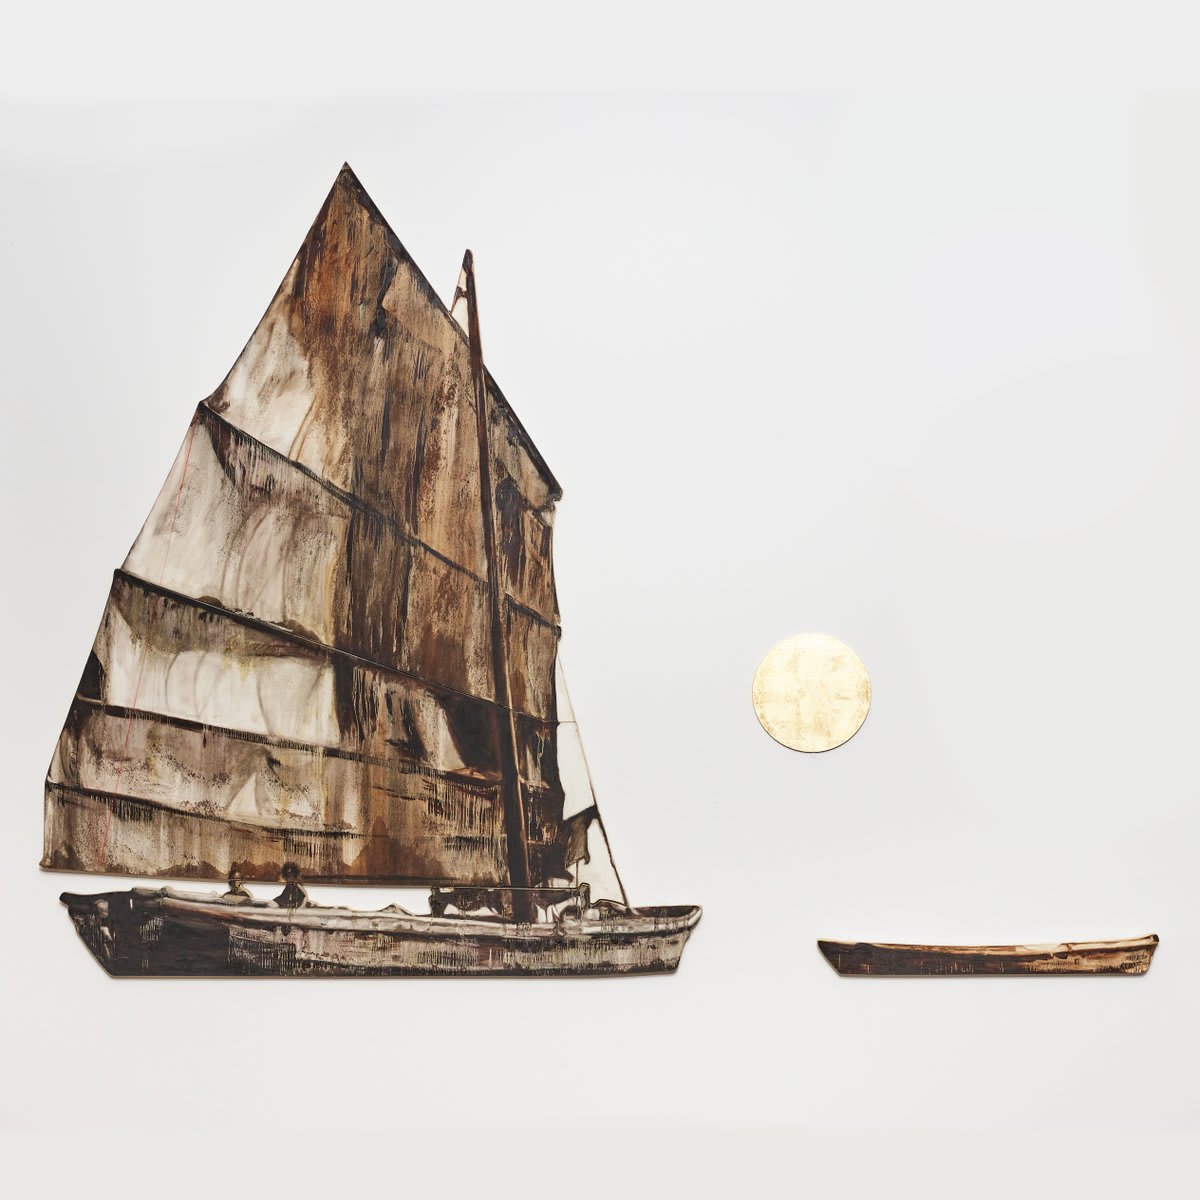 Hung Liu's 'Shrimp Junk II' has a unique connection to the Bay Area. This piece represents some of the Chinese fishing villages that existed in the city around that time. Chinese fishermen would use redwood to build flat-bottom junks to troll the waters for shrimp.